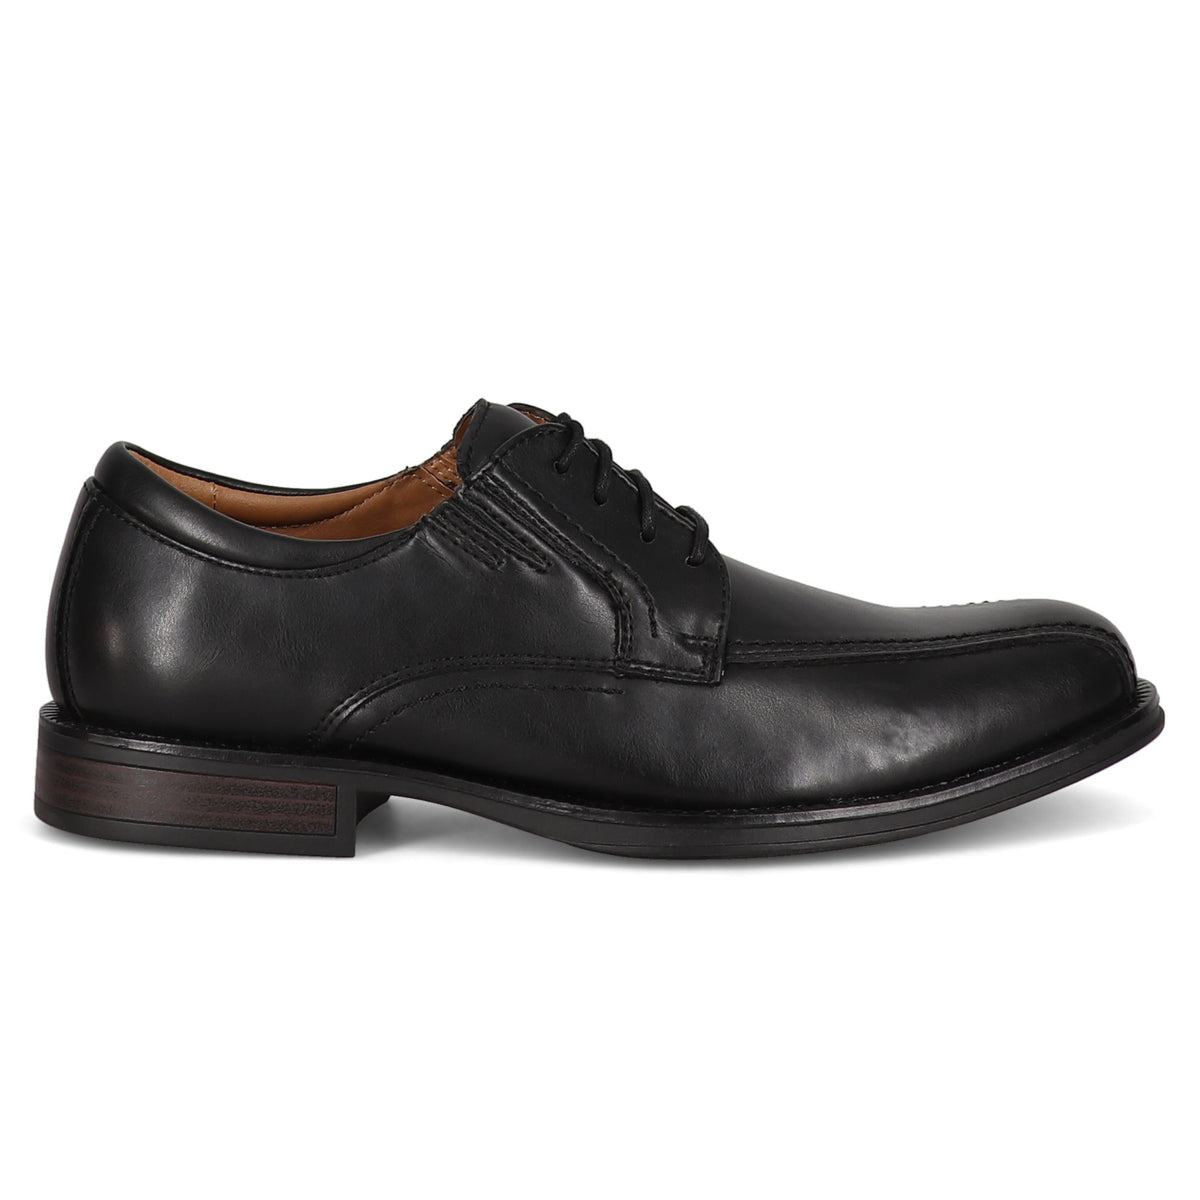 Dockers Shoes Geyer Black Shoes